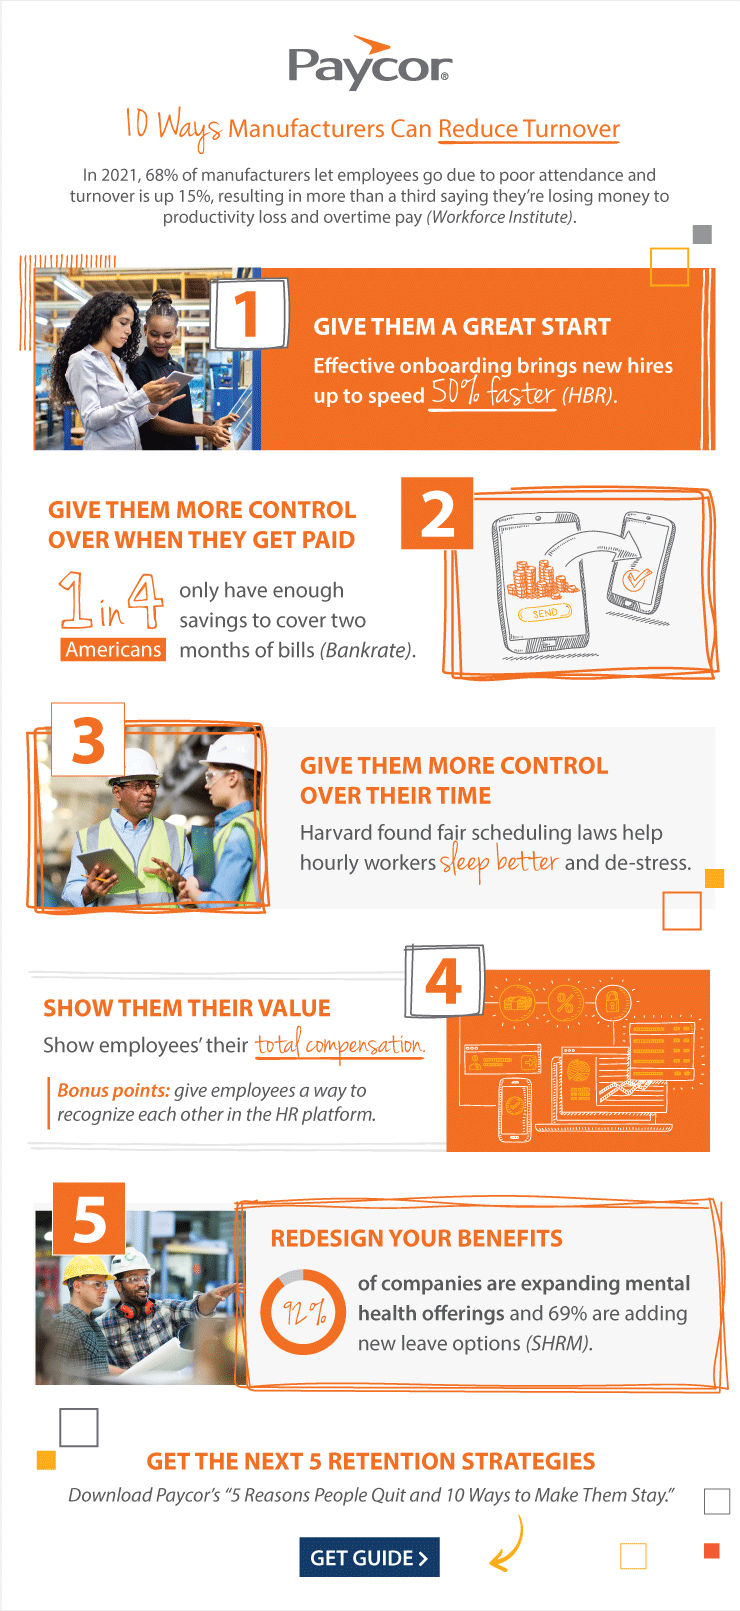 Paycor's 10 Ways Manufacturers Can Reduce Turnover Infographic